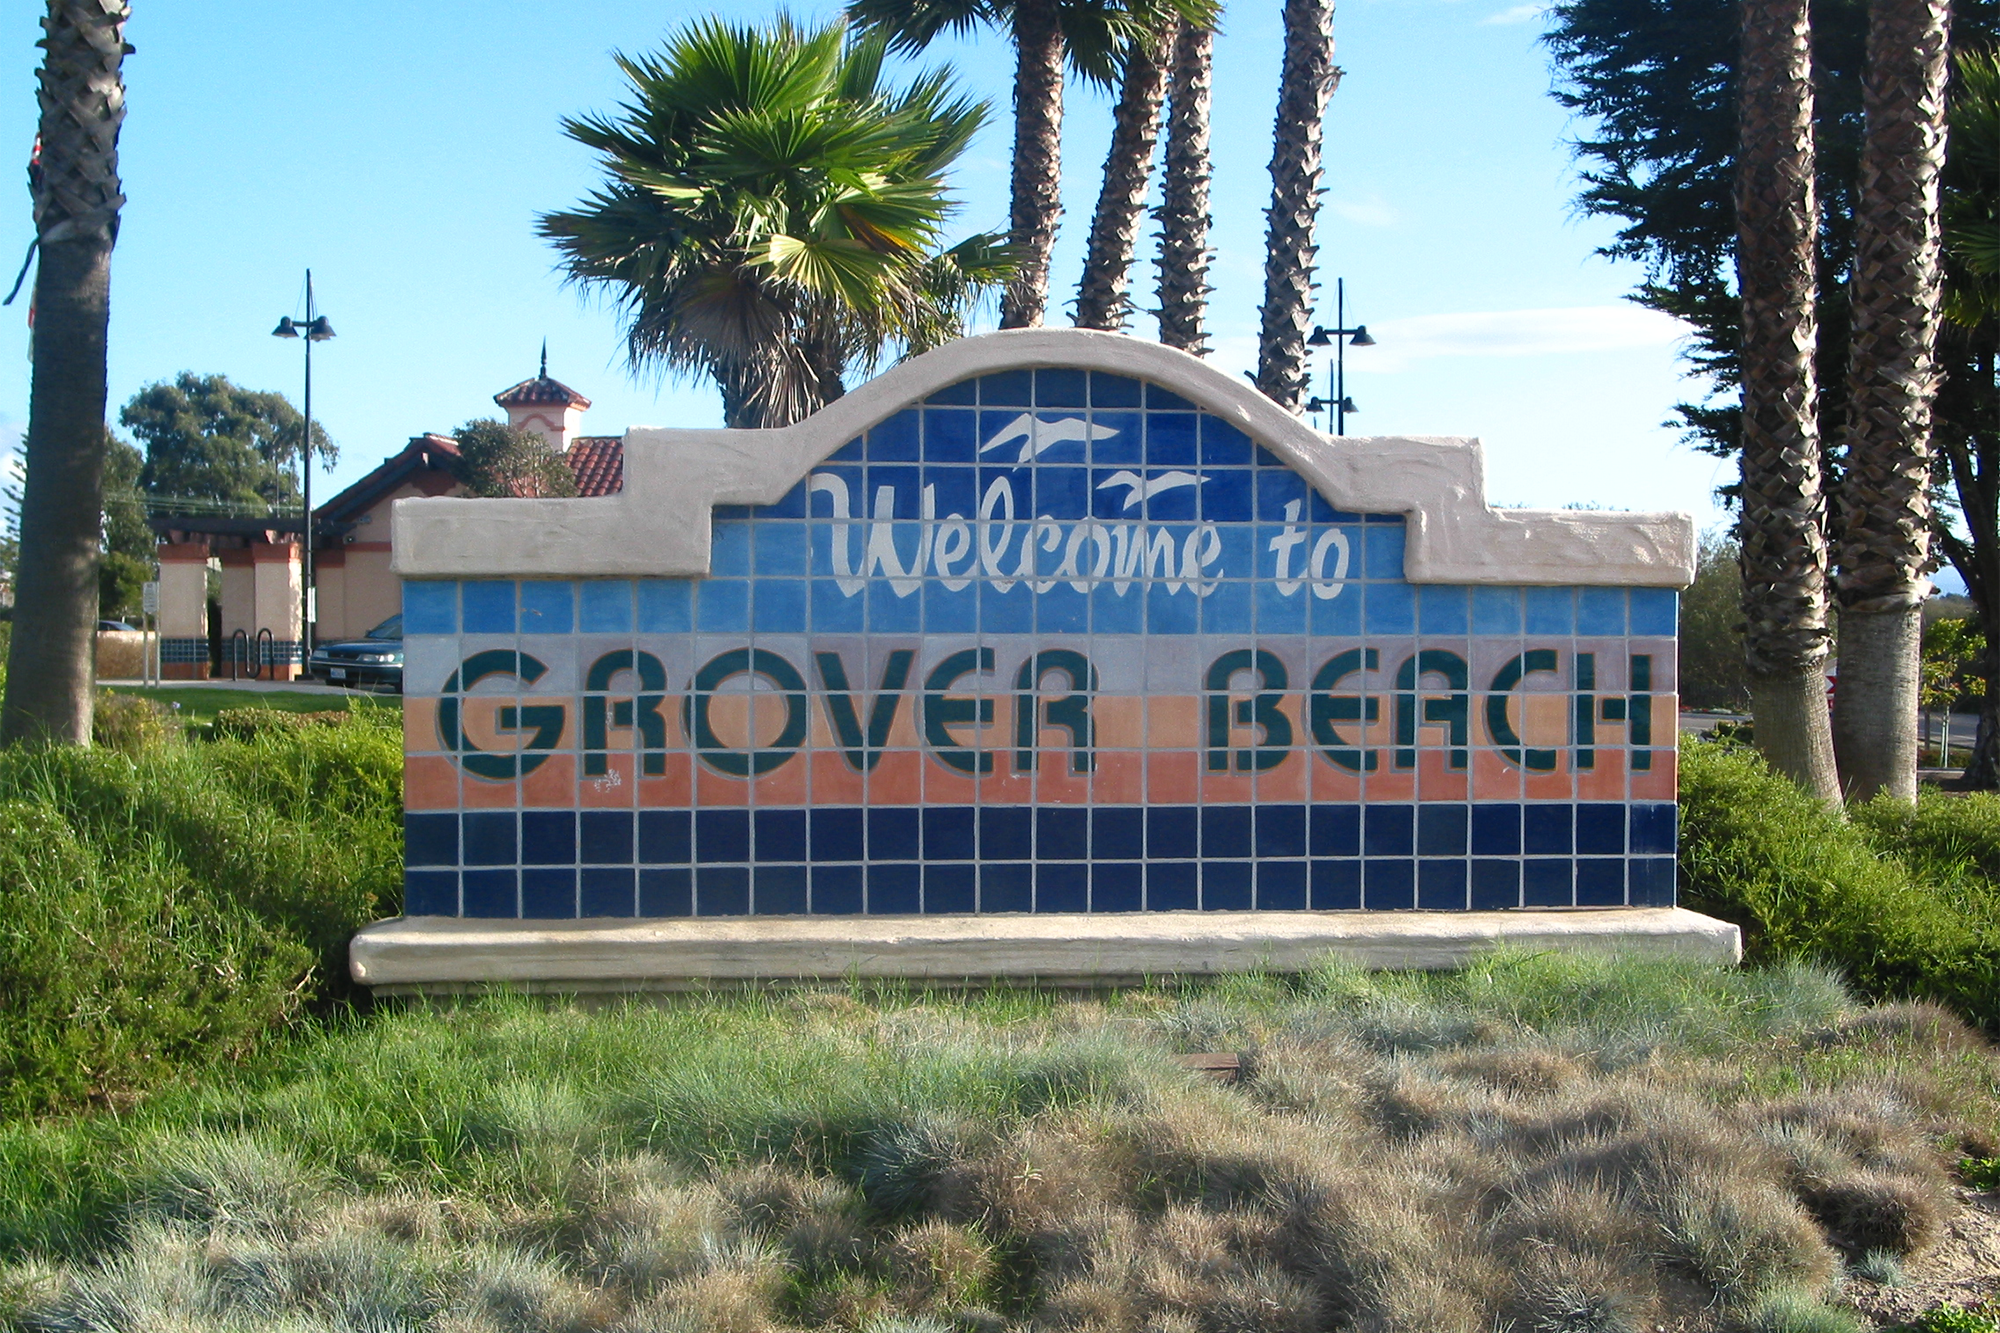 Welcome to Grover Beach sign